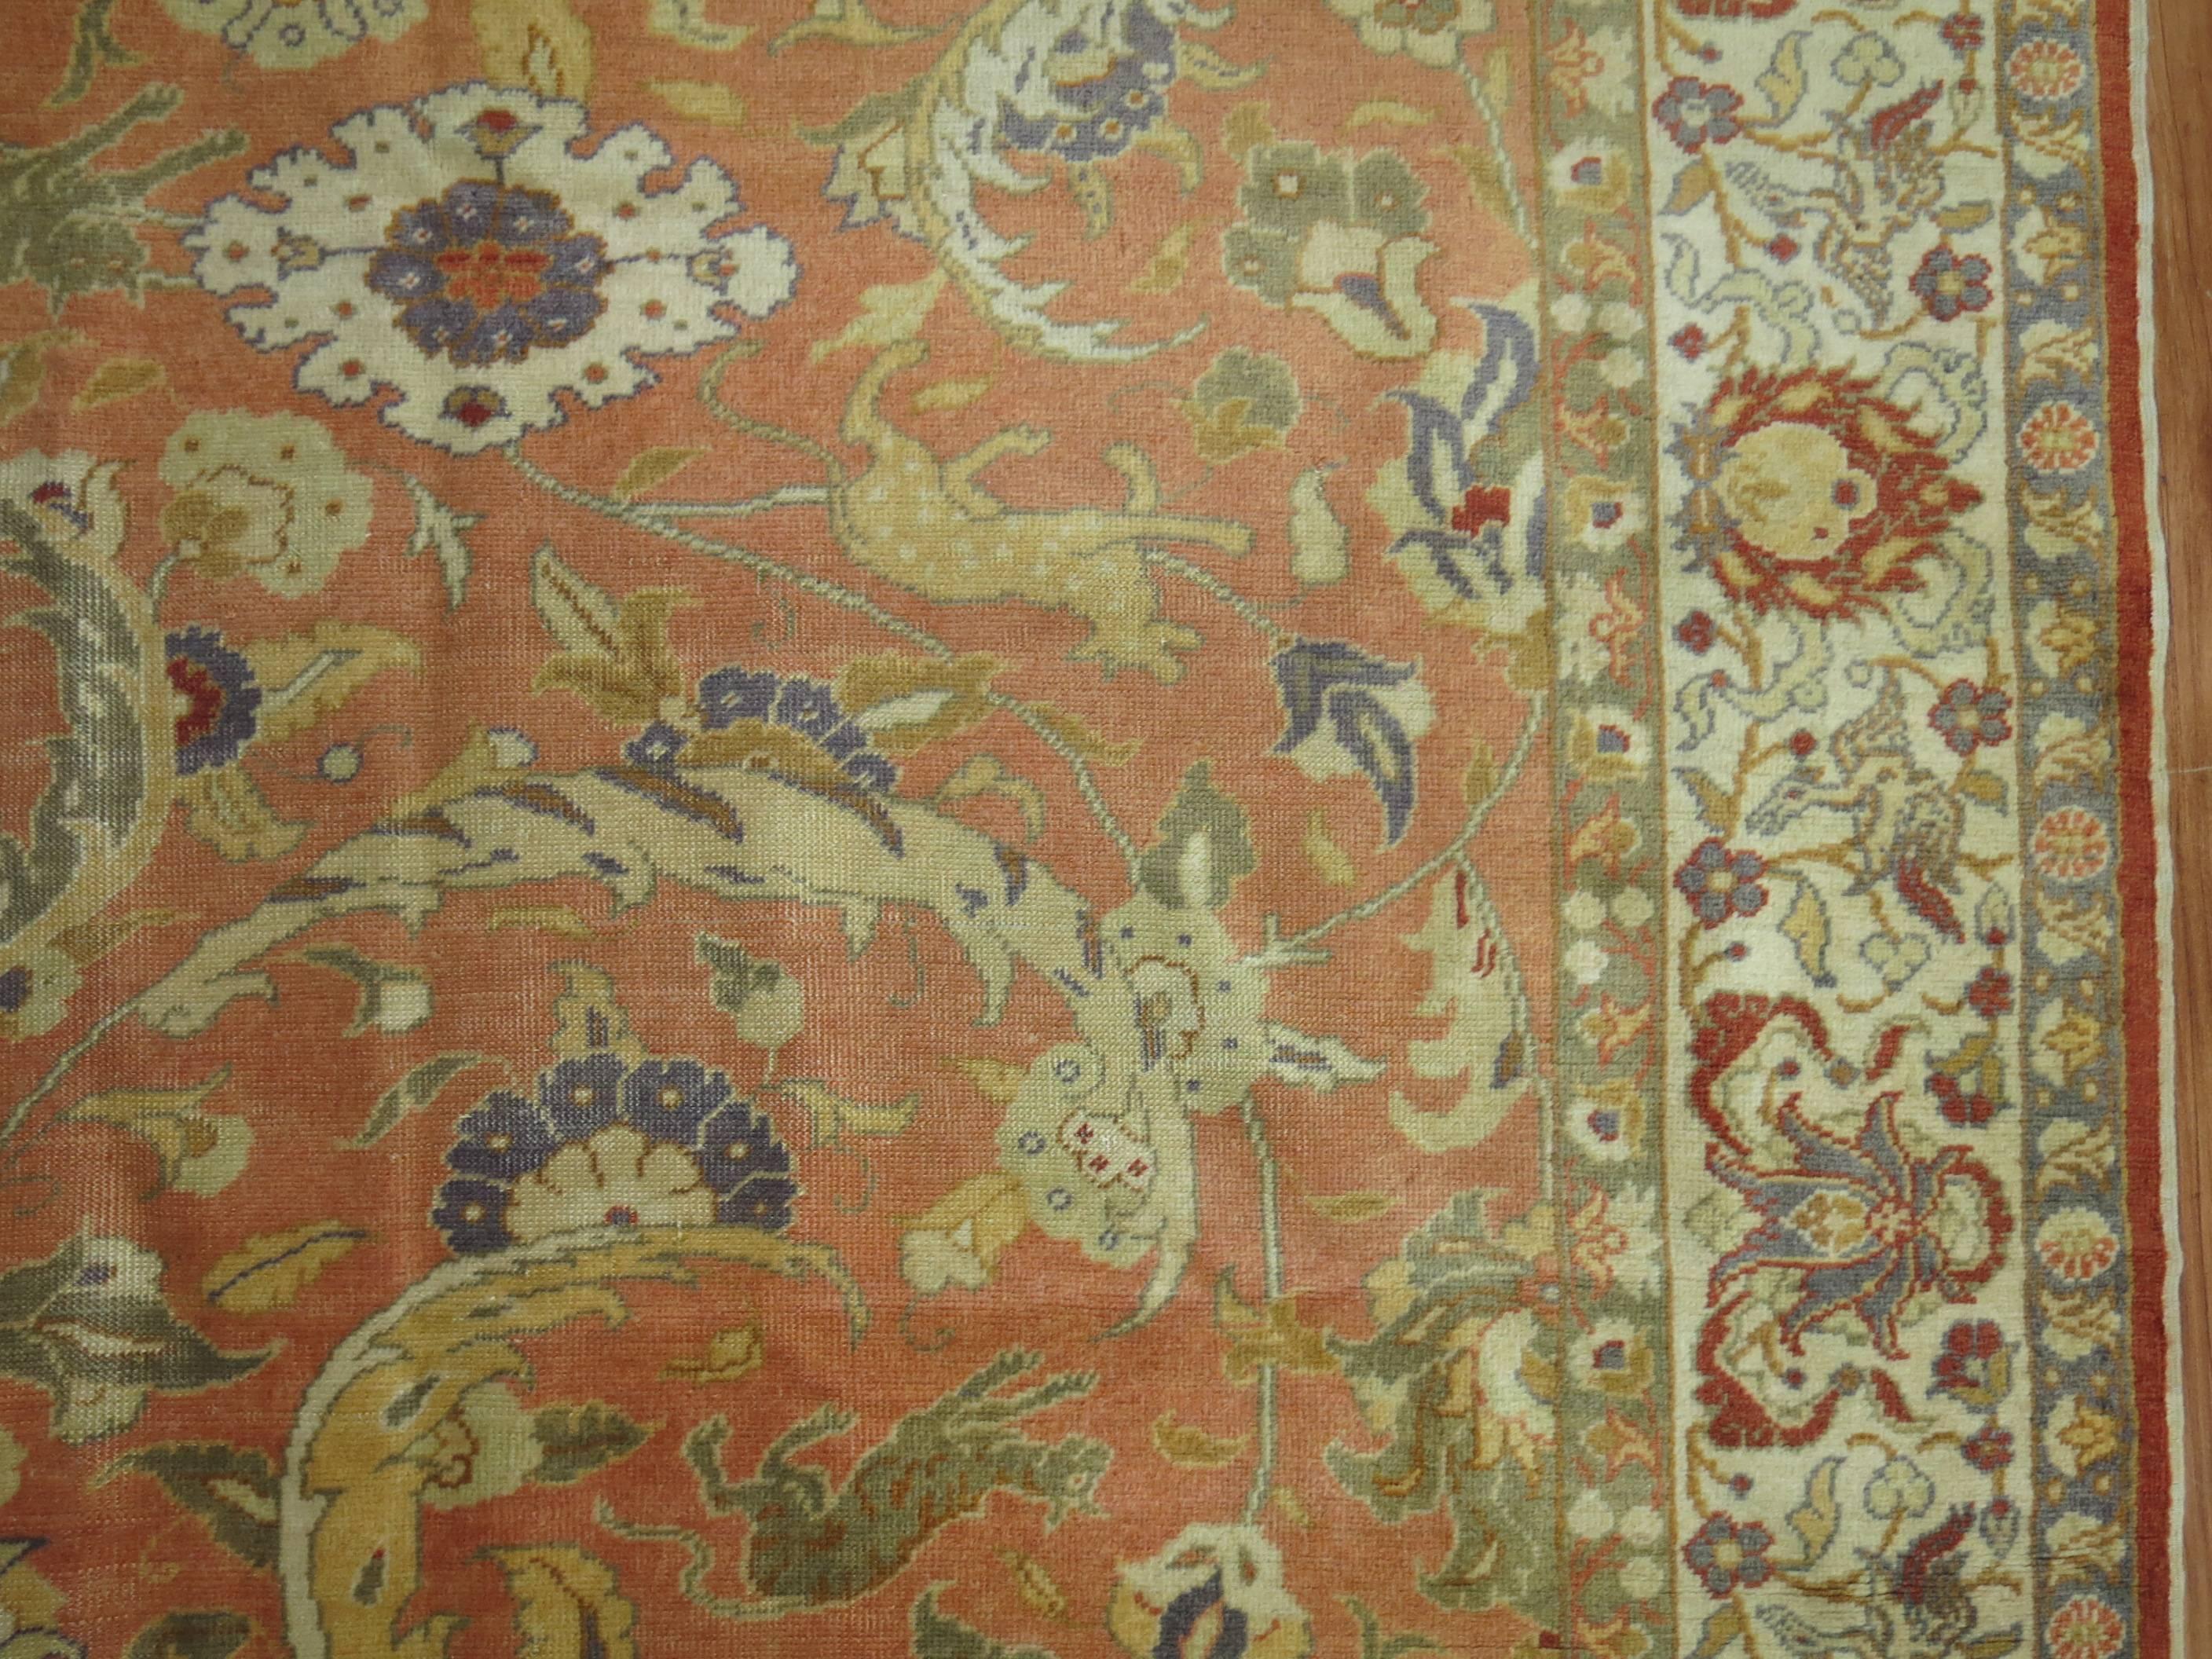 Hand-Knotted Lions and Tigers Turkish Sivas Pictorial Rug